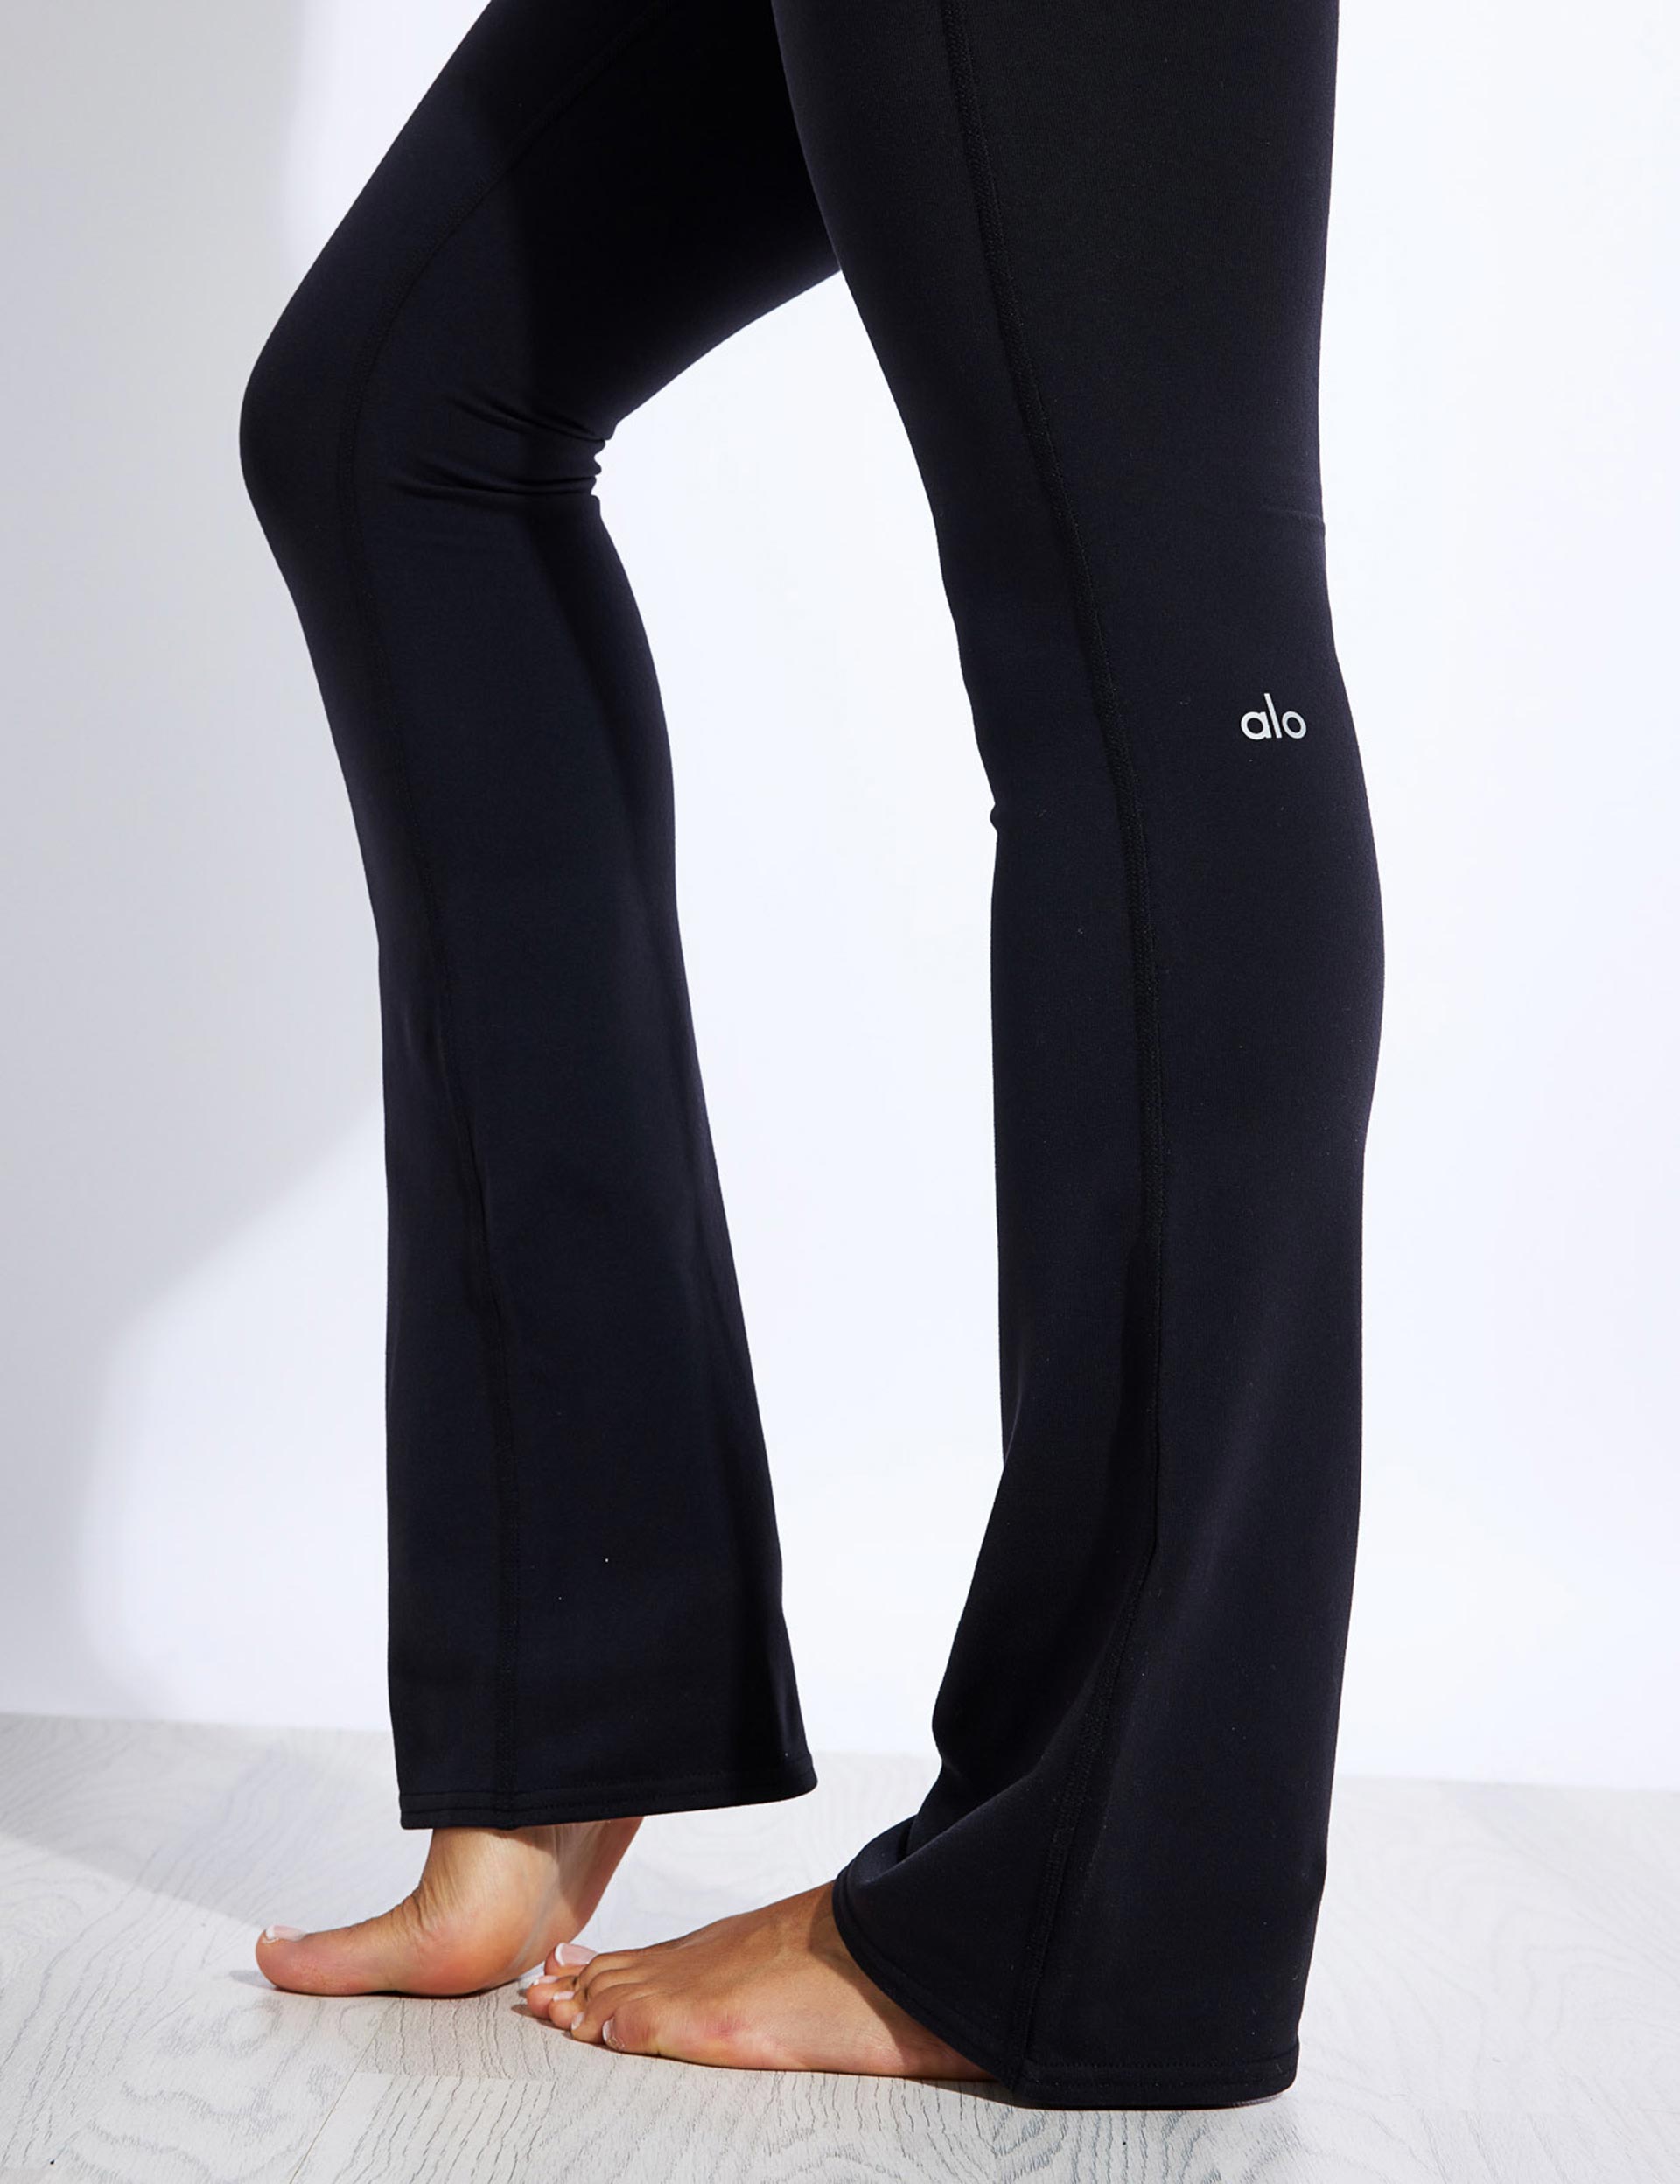 ALO Airbrush high-waist bootcut legging styling options⁣ ⁣⁣⁣⁣⁣⁣⁣ Shop now  at 𝐣𝐚𝐝𝐞-𝐣𝐚𝐤𝐚𝐫𝐭�